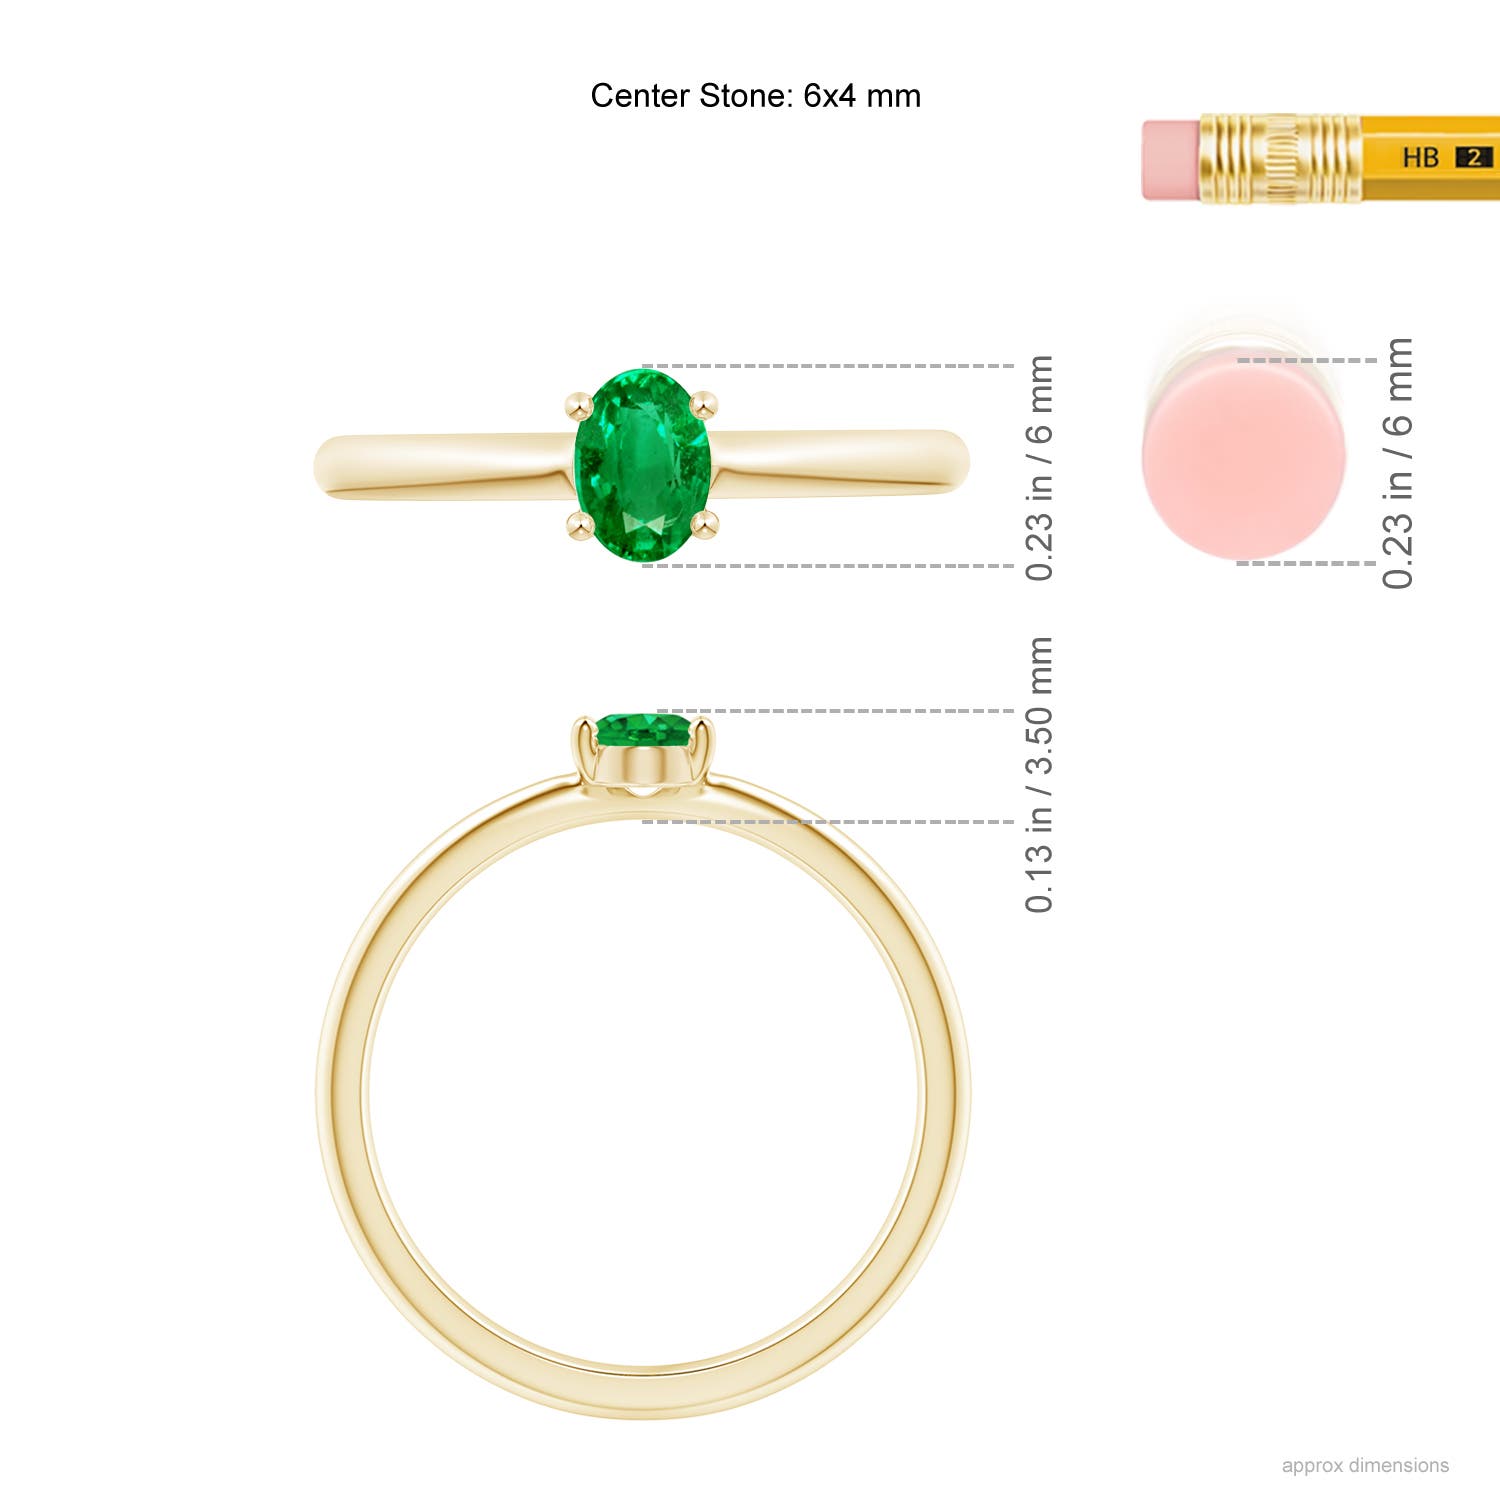 AAA - Emerald / 0.4 CT / 14 KT Yellow Gold